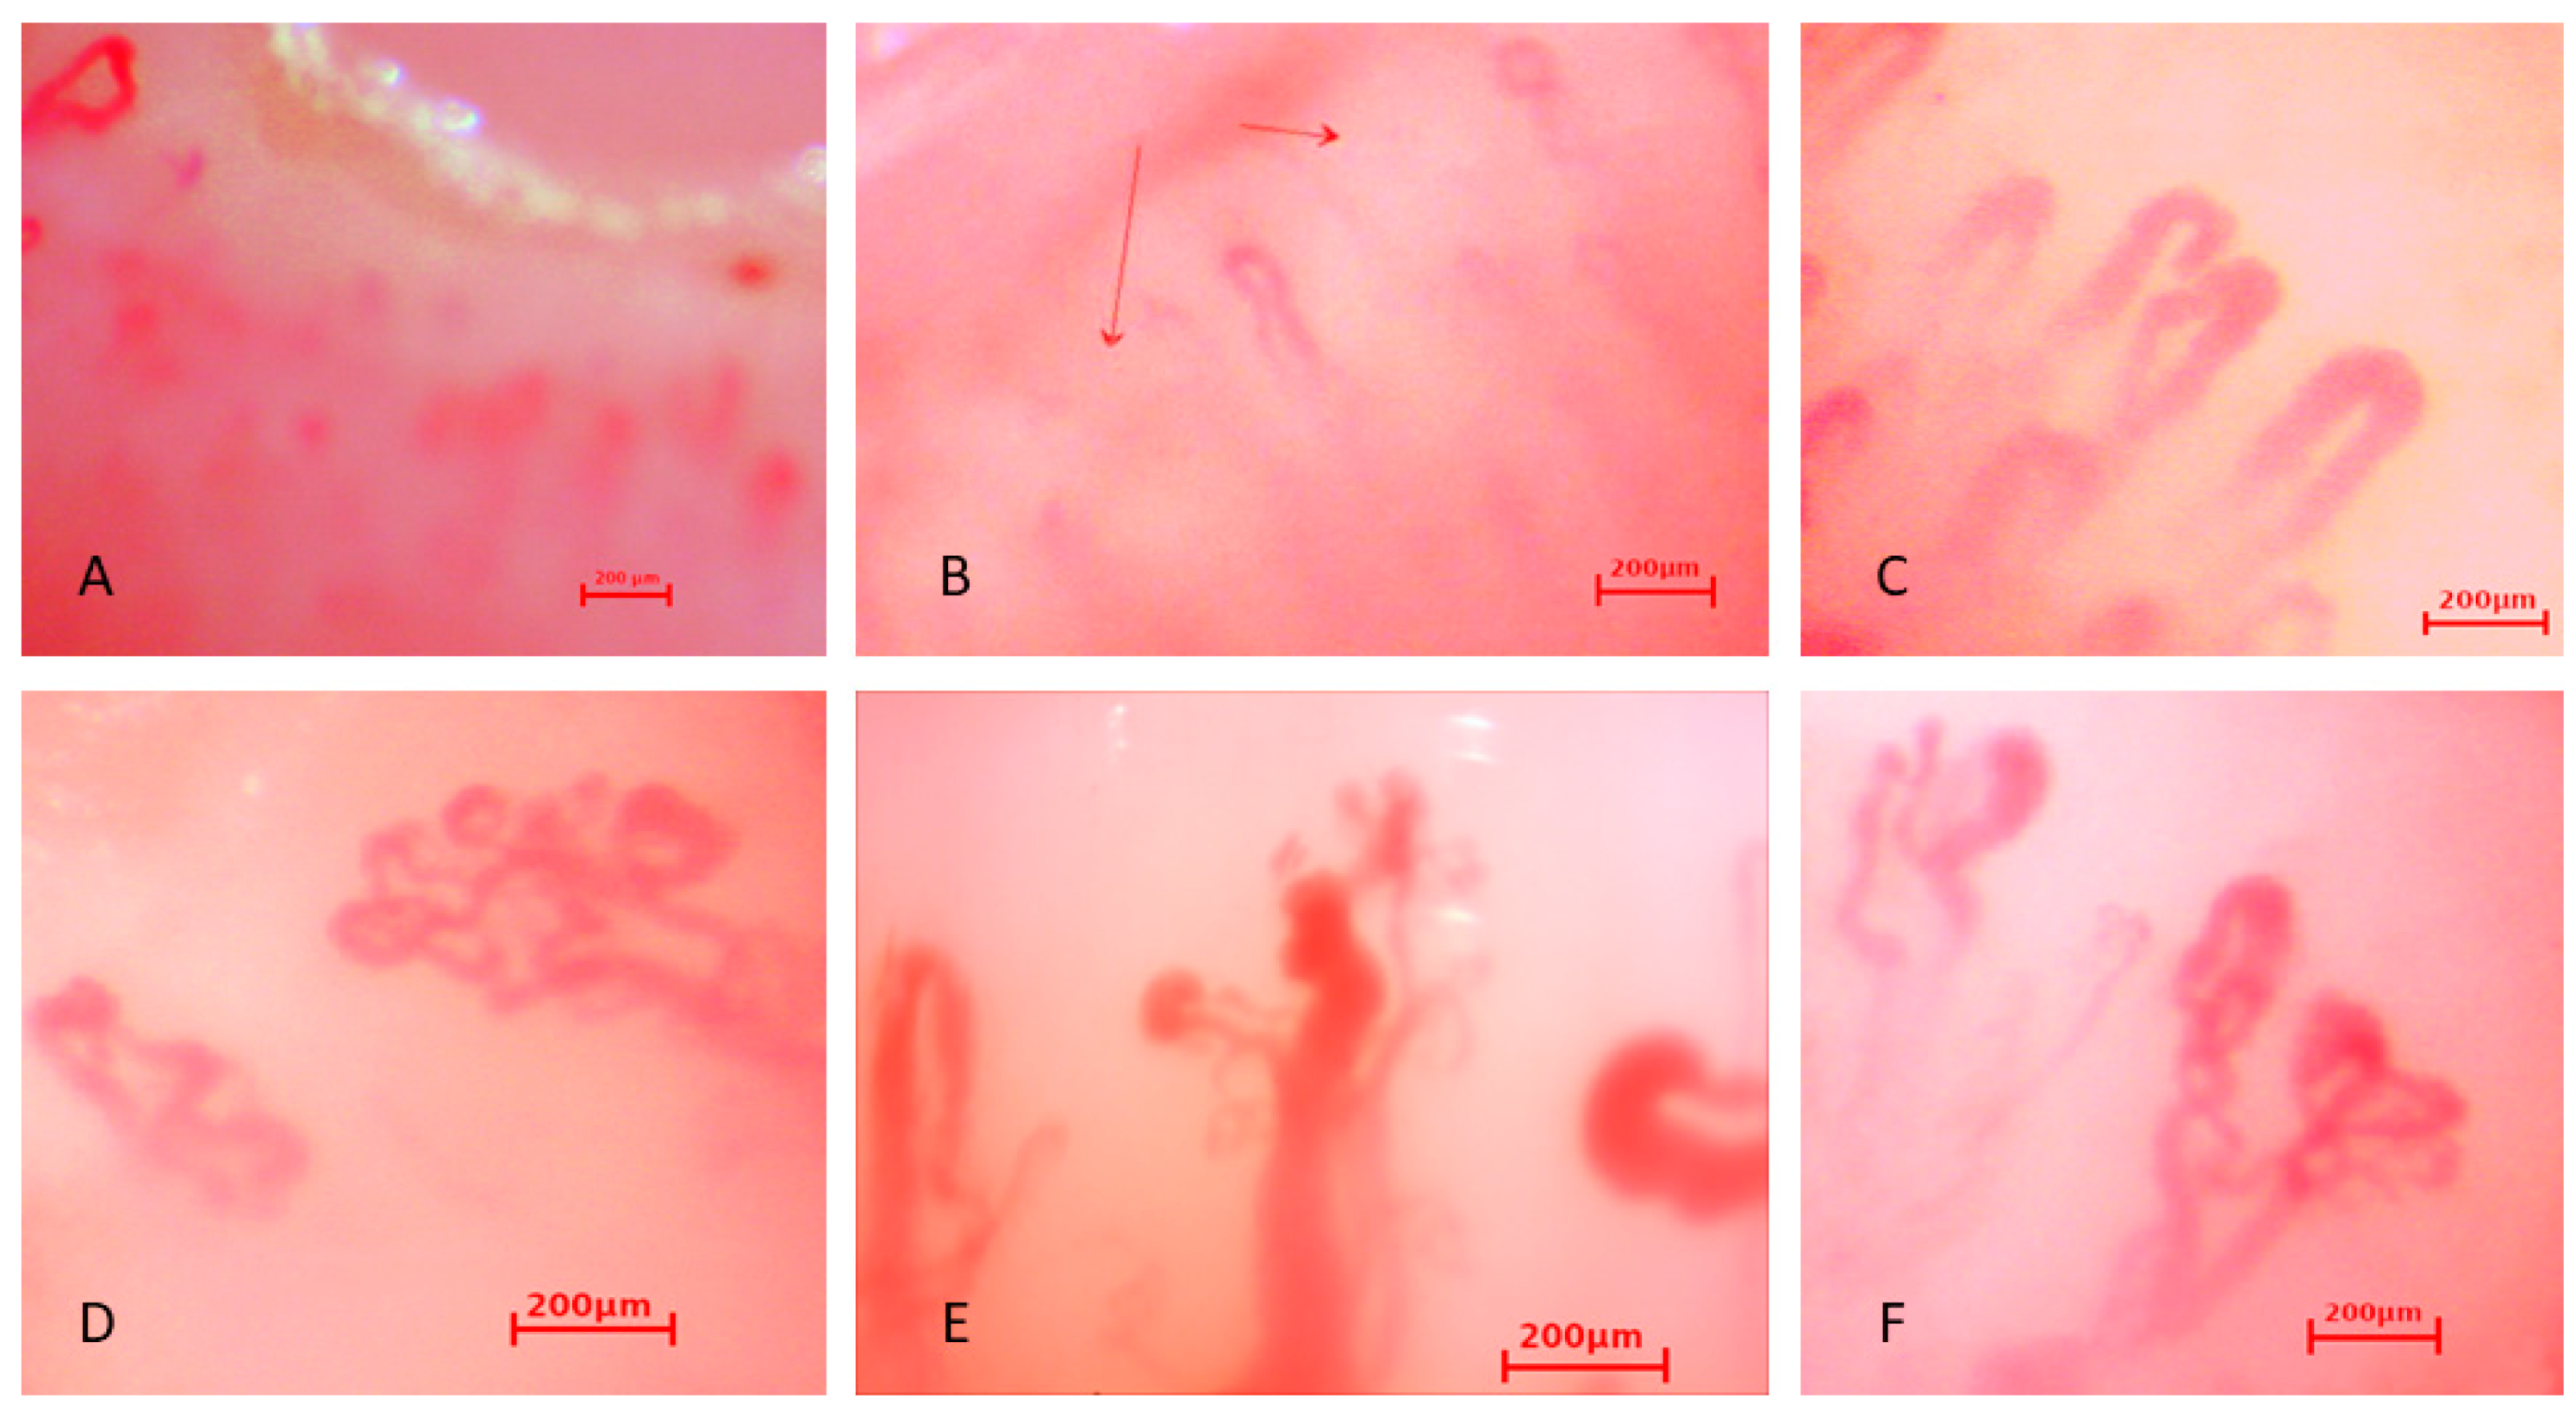 JCM | Free Full-Text | Microangiopathy in Naifold Videocapillaroscopy and  Its Relations to sE- Selectin, Endothelin-1, and hsCRP as Putative  Endothelium Dysfunction Markers among Adolescents with Raynaud's Phenomenon  | HTML